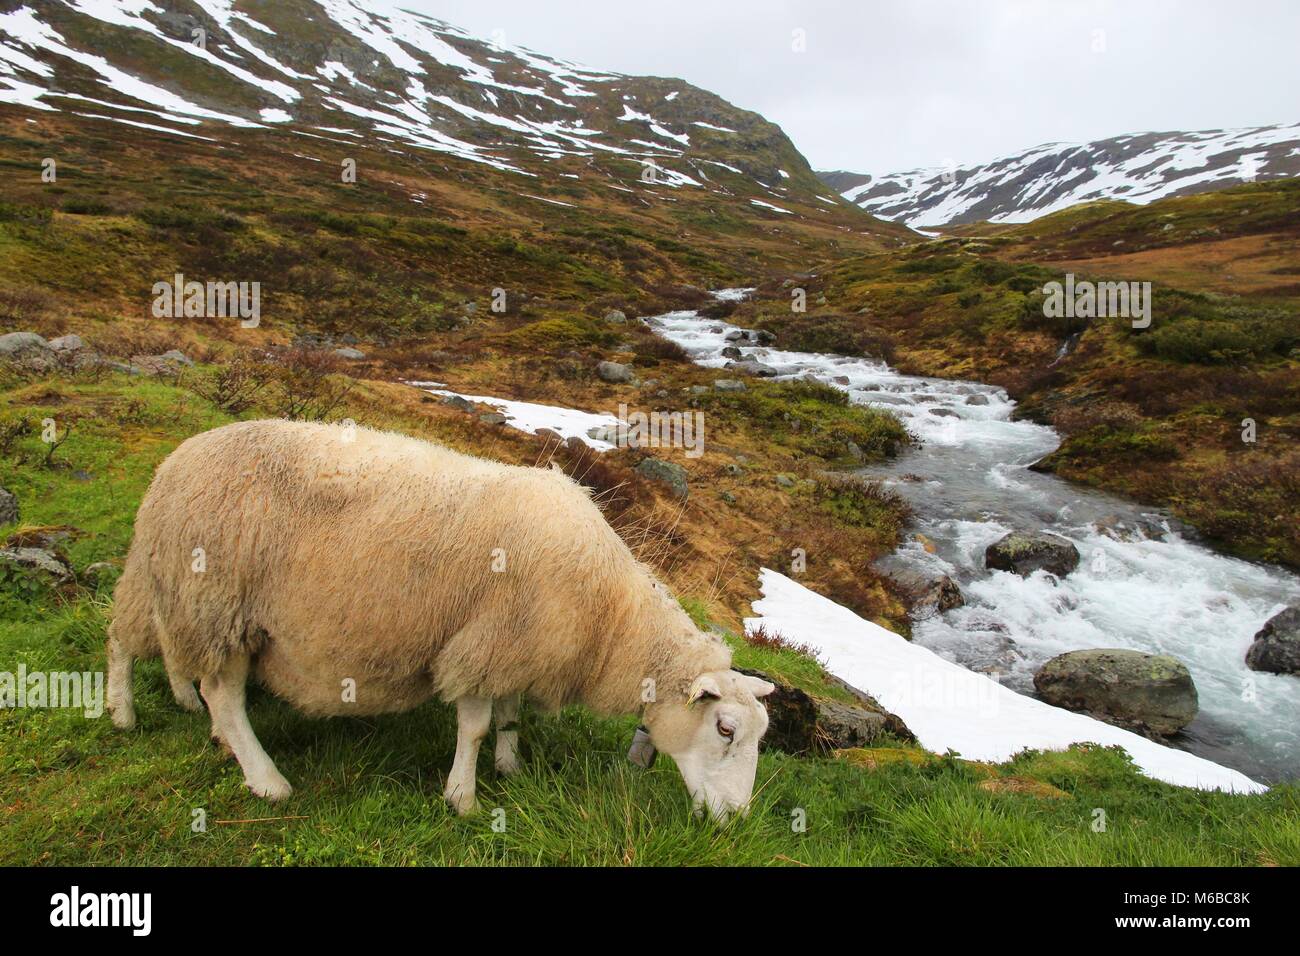 Sheep in tundra biome landscape in Norway. Mountain stream in Aurlandsfjellet. Stock Photo